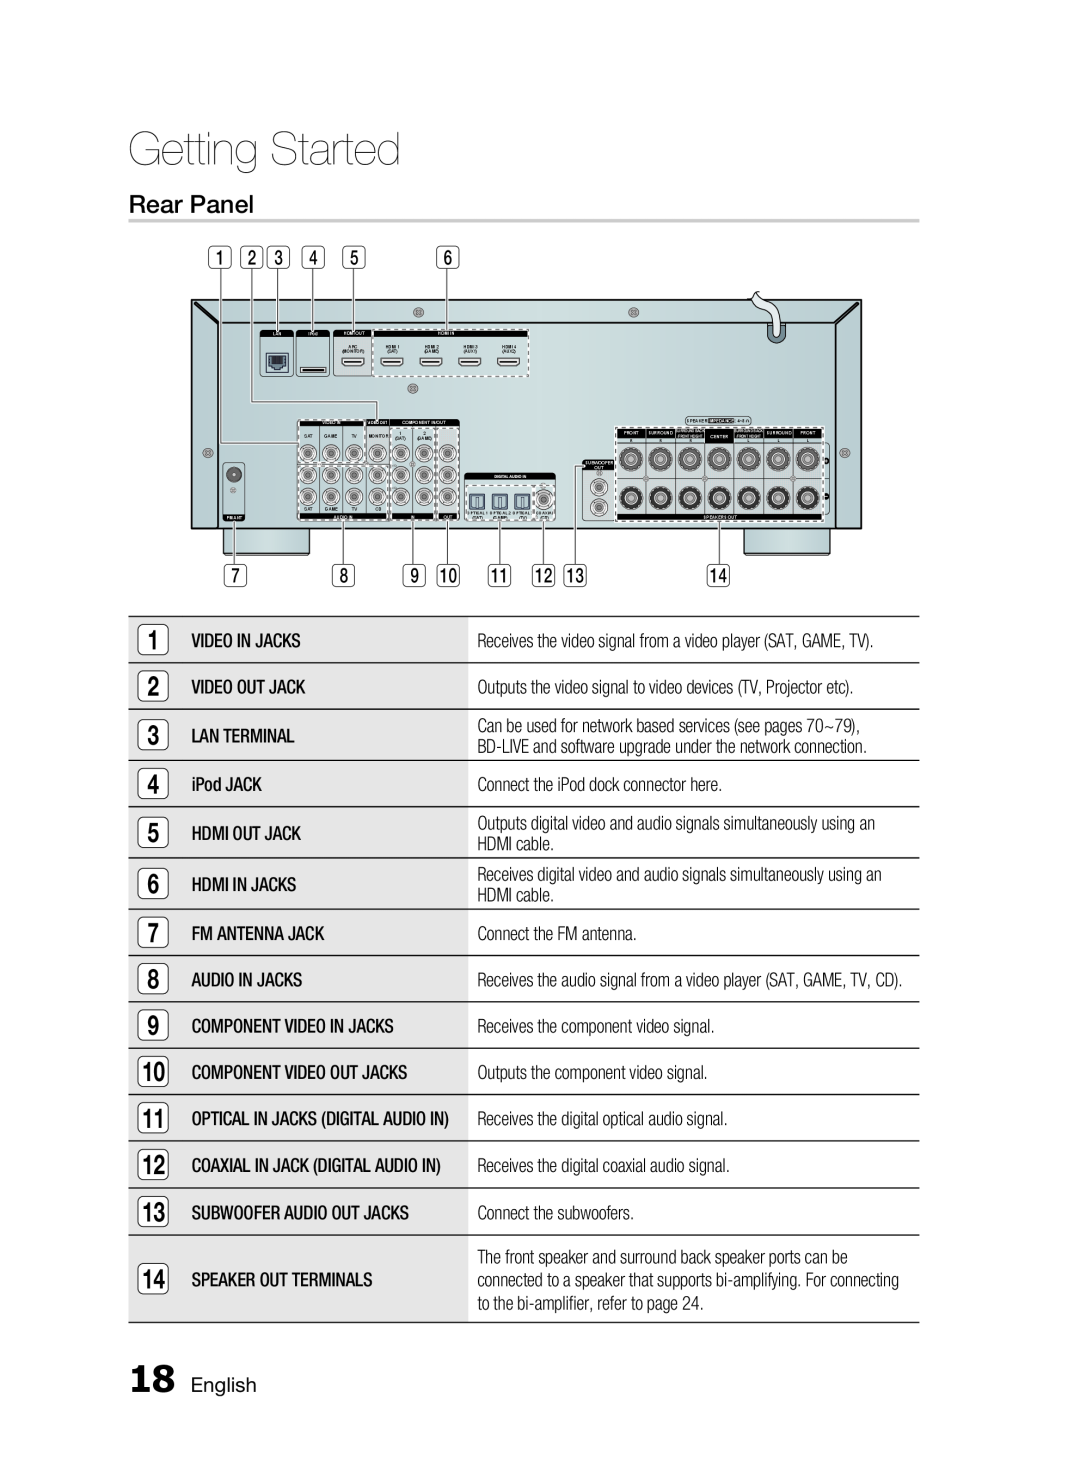 Samsung HW-D7000 user manual Rear Panel, Getting Started 